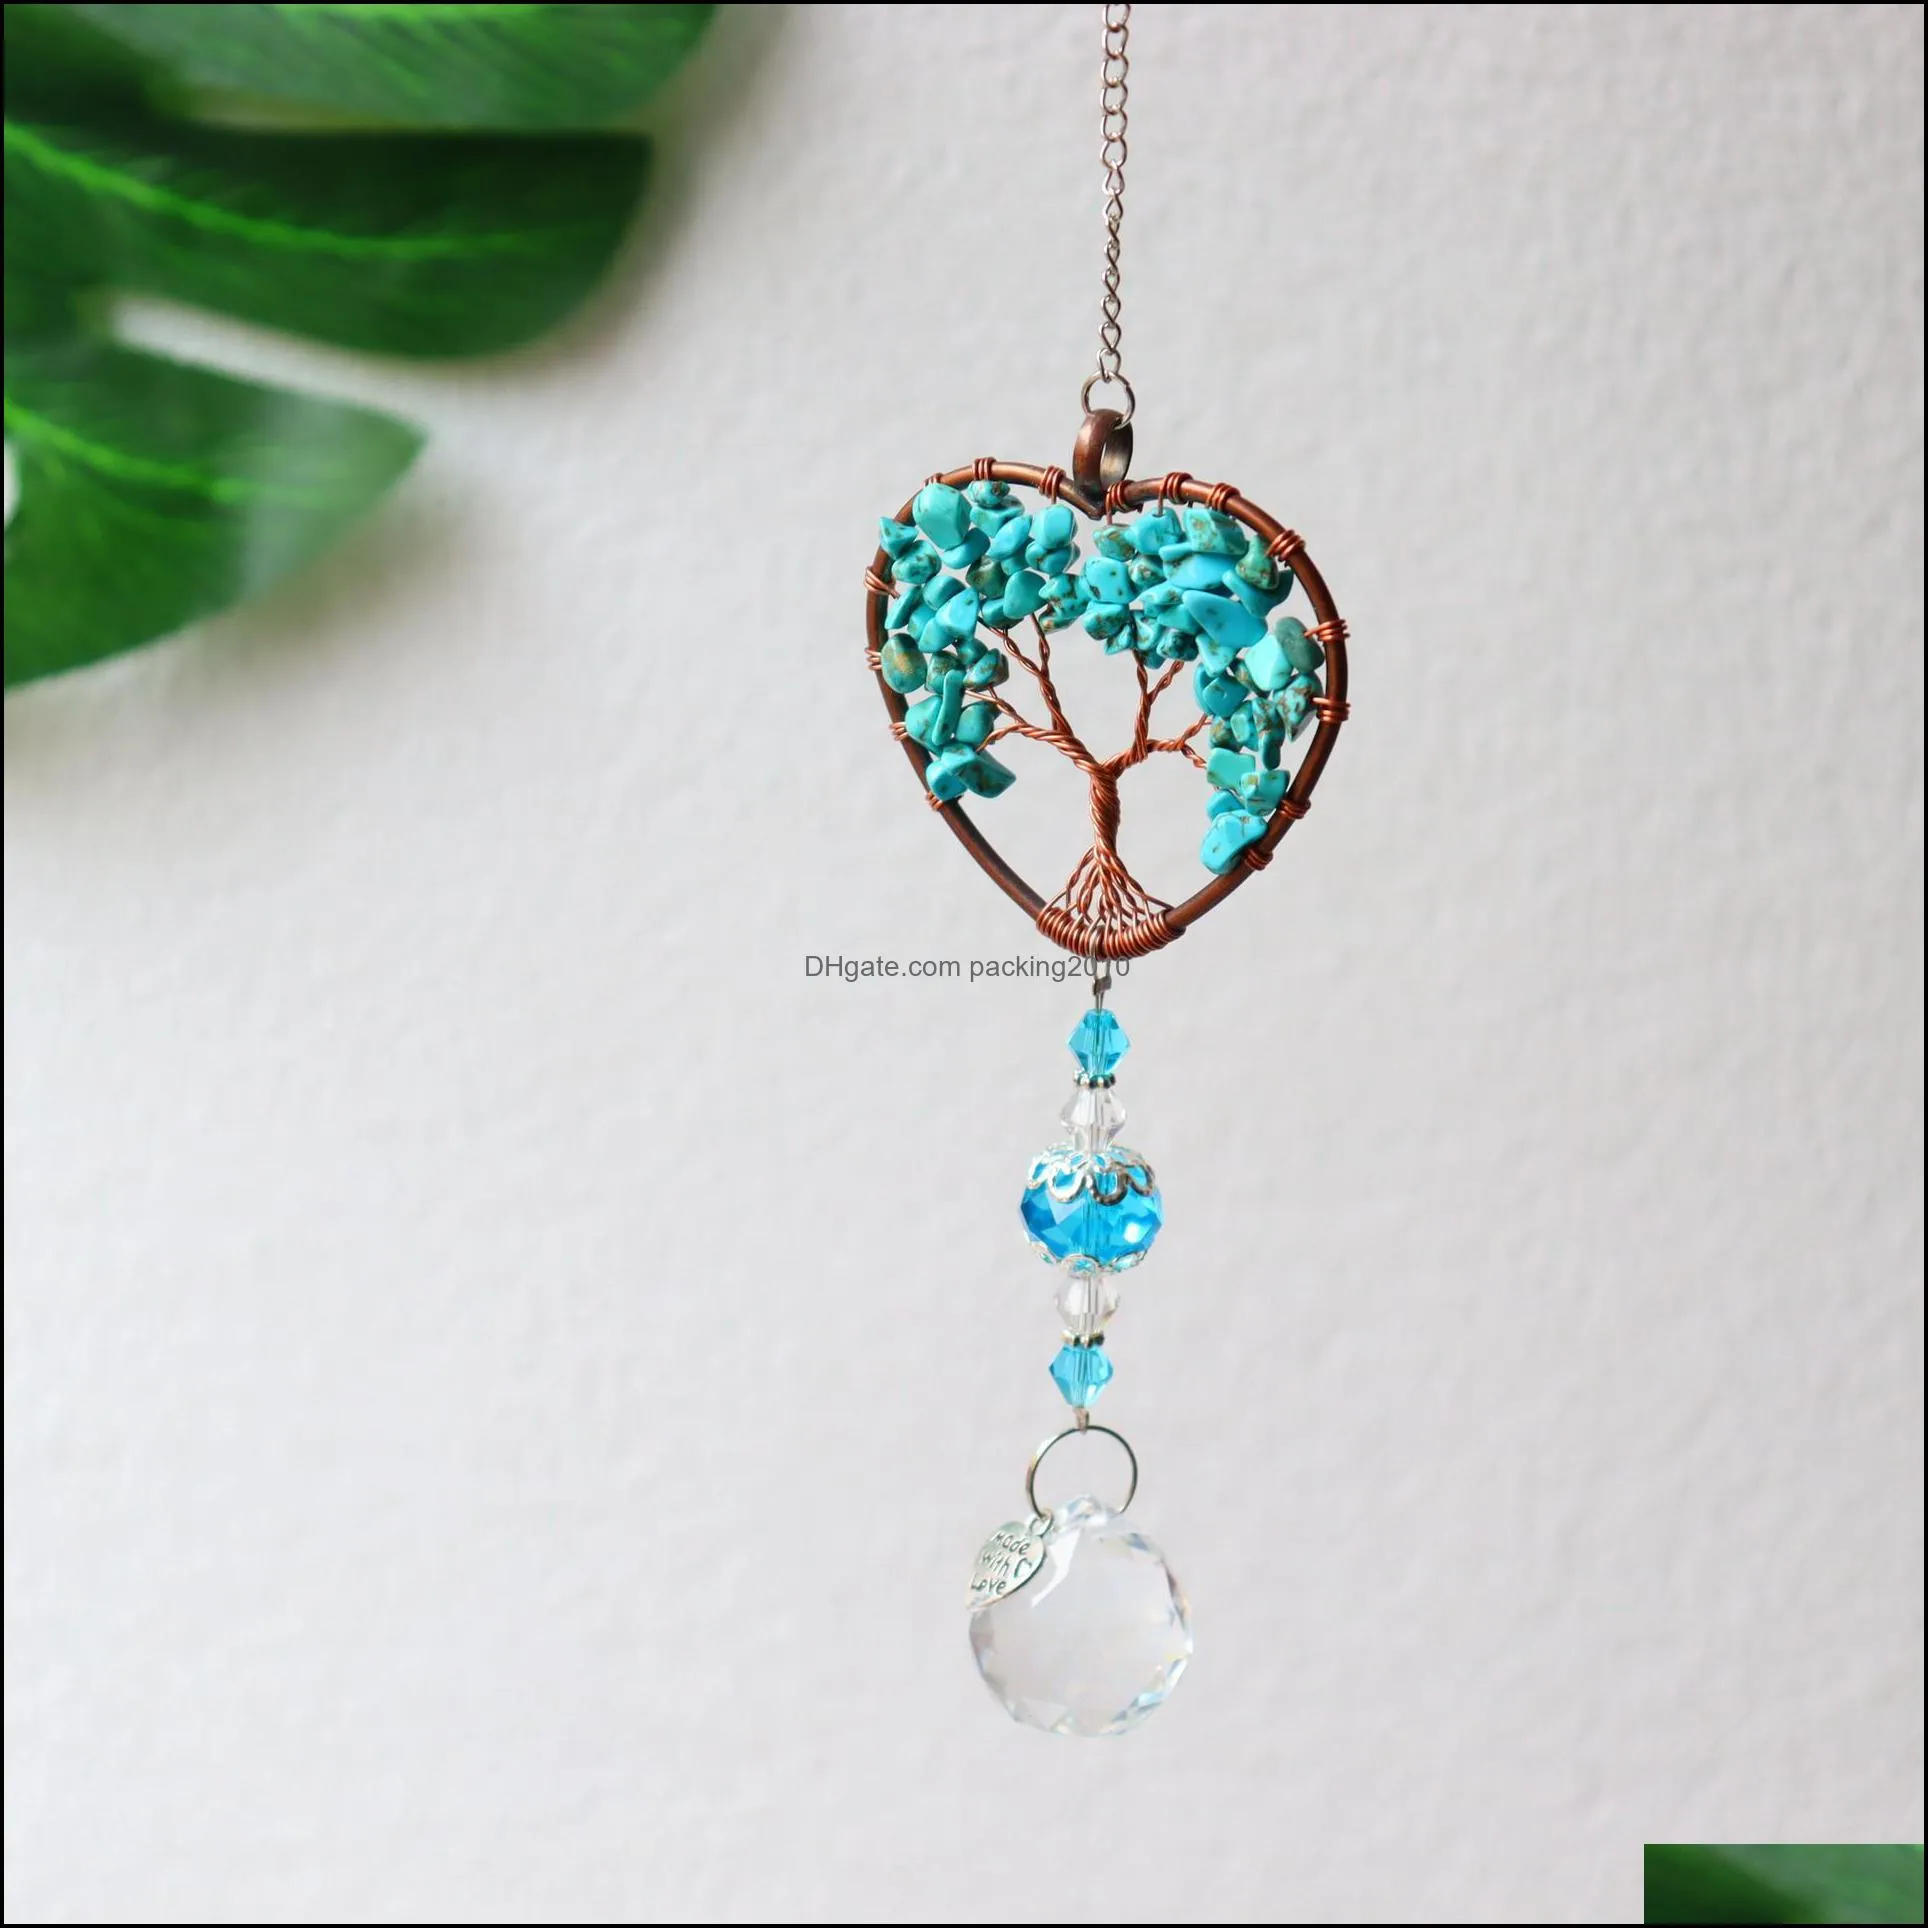 5 Colour Hanging Crystal Suncatcher Life Tree Stone Pendant Love Wind Chimes Beads Prism Maker Drops Hang for Window, Home Decor, Car